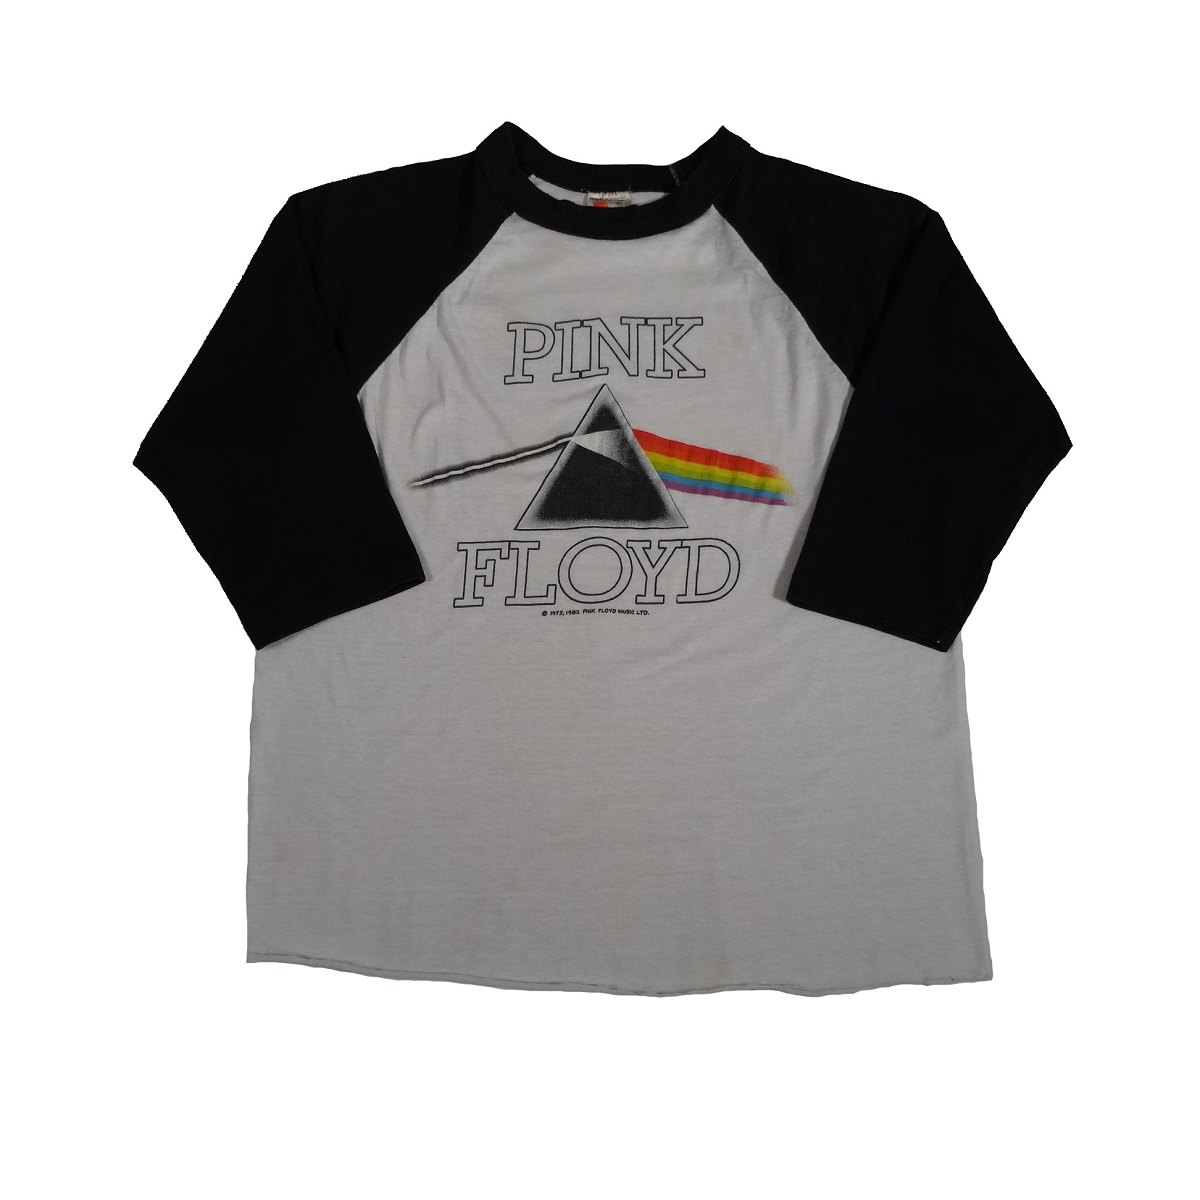 pink floyd dark side of the moon vintage 80s t shirt front